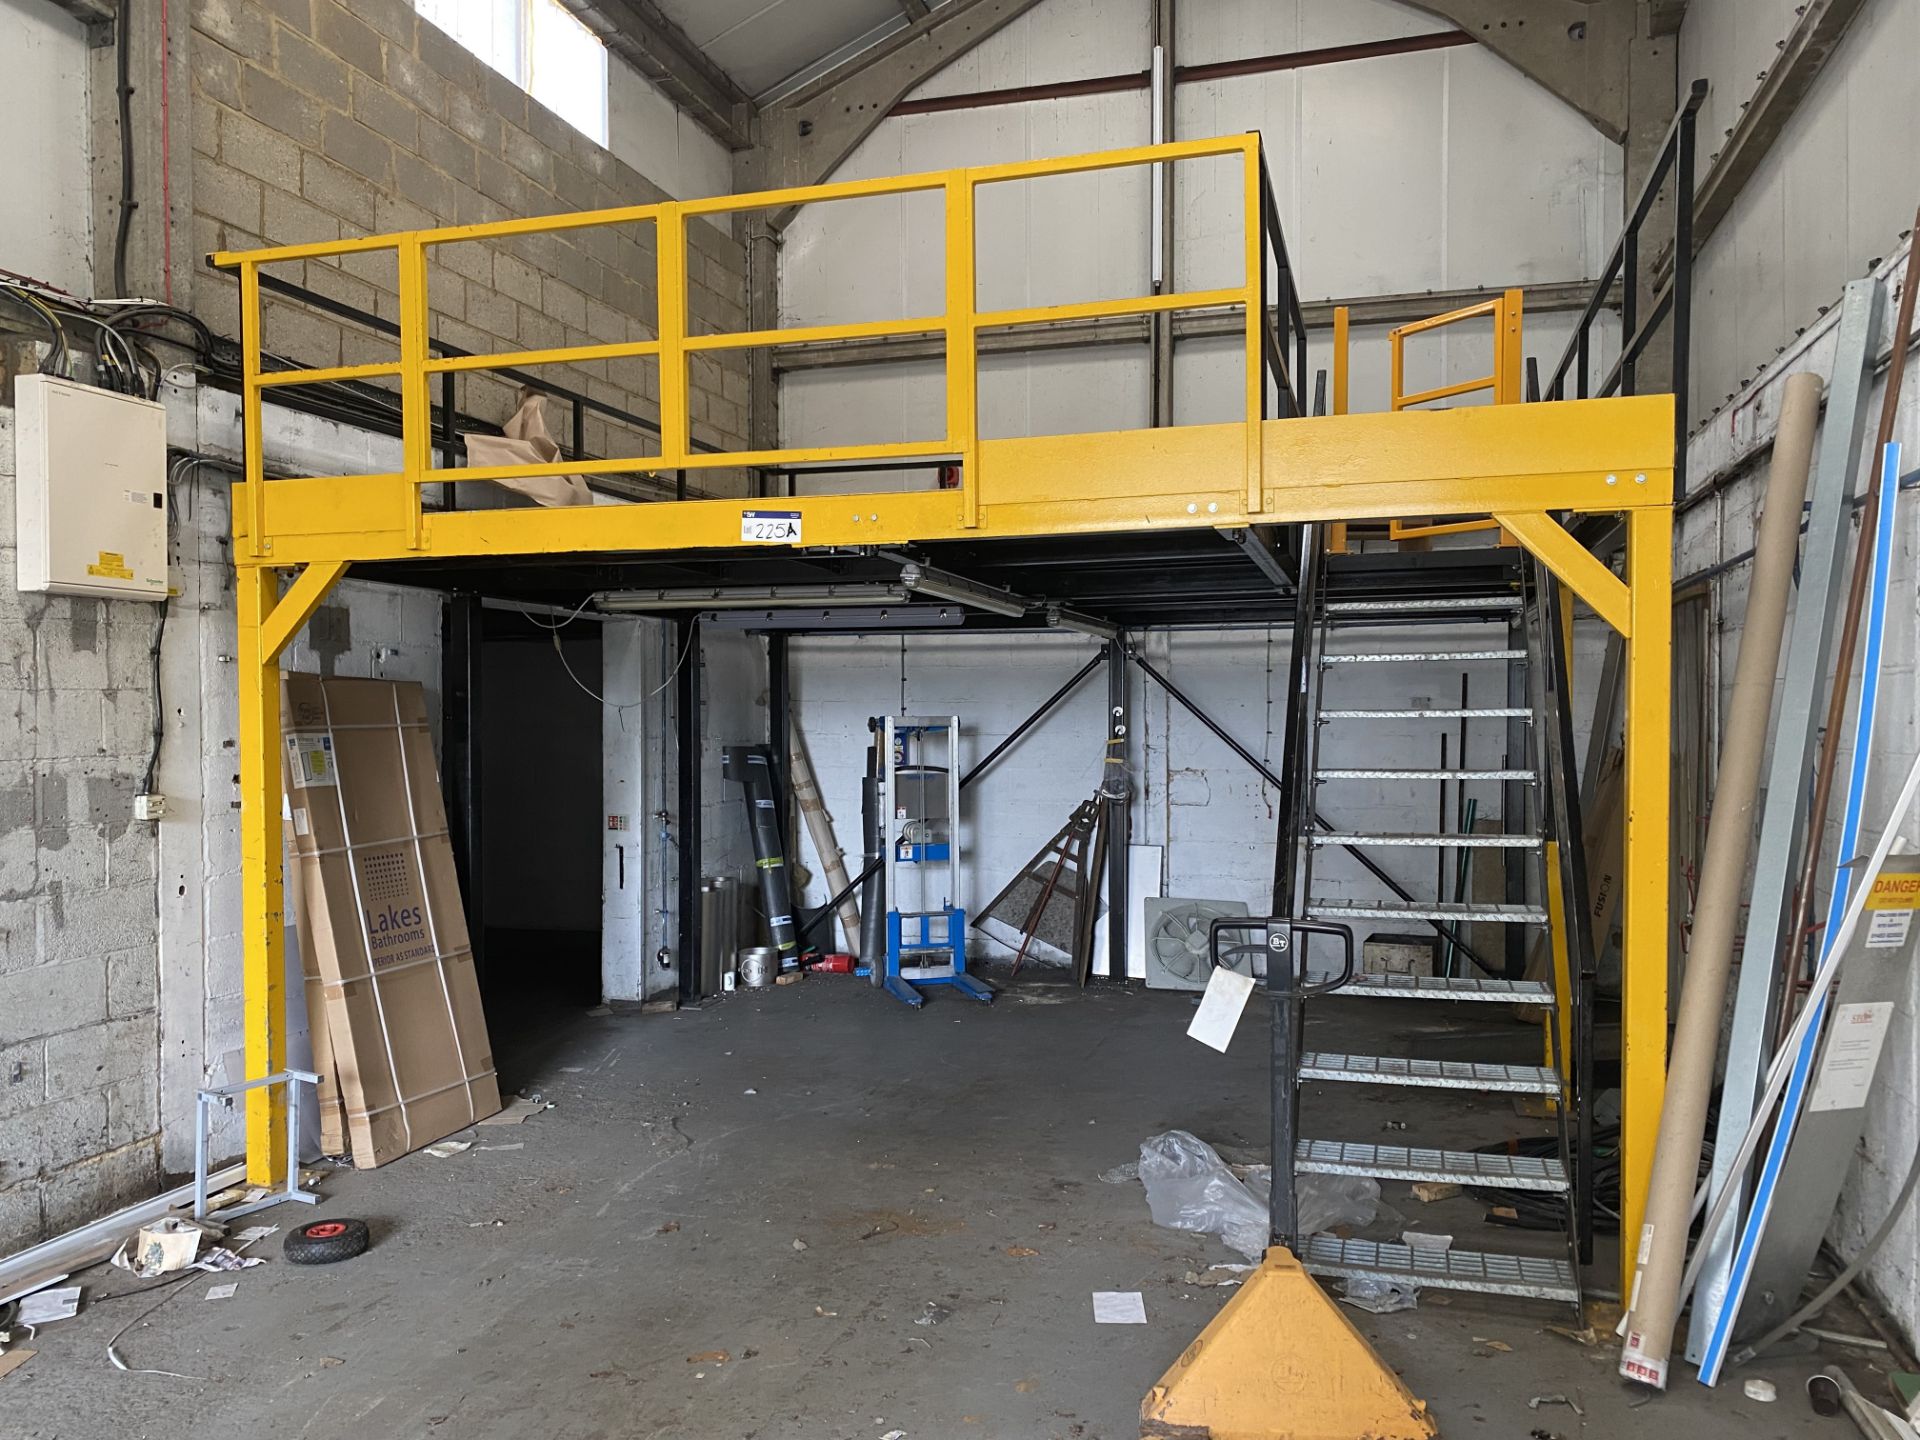 BOLTED SECTIONAL STEEL MEZZANINE FLOOR, approx. 4.7m x 4.5m x 2.4m high, with ten rise steel